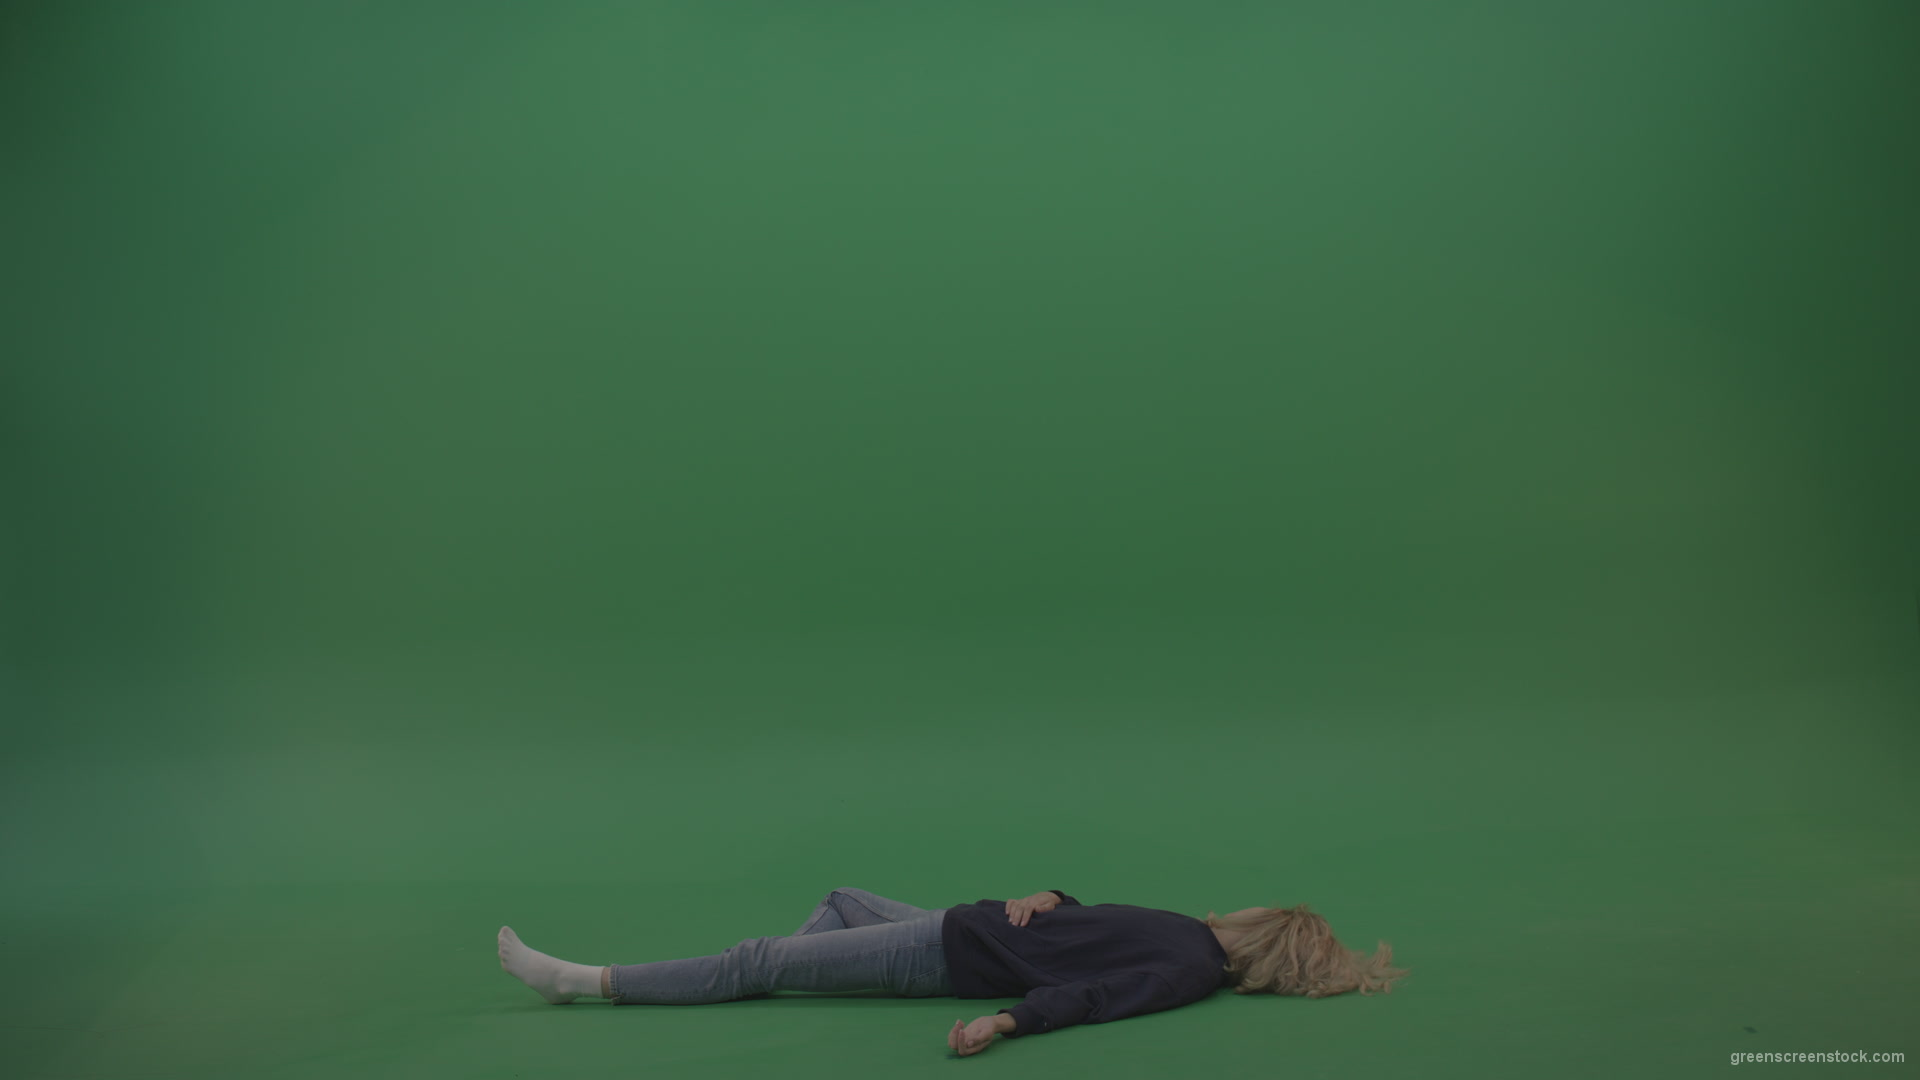 Brave_Fireman_Runs_To_Unconscious_Young_Victim_Girl_Slightly_Wakes_Her_Up_Takes_On_Strong_Hands_And_Carries_Towards_Safety_On_Green_Screen_Wall_Background_001 Green Screen Stock